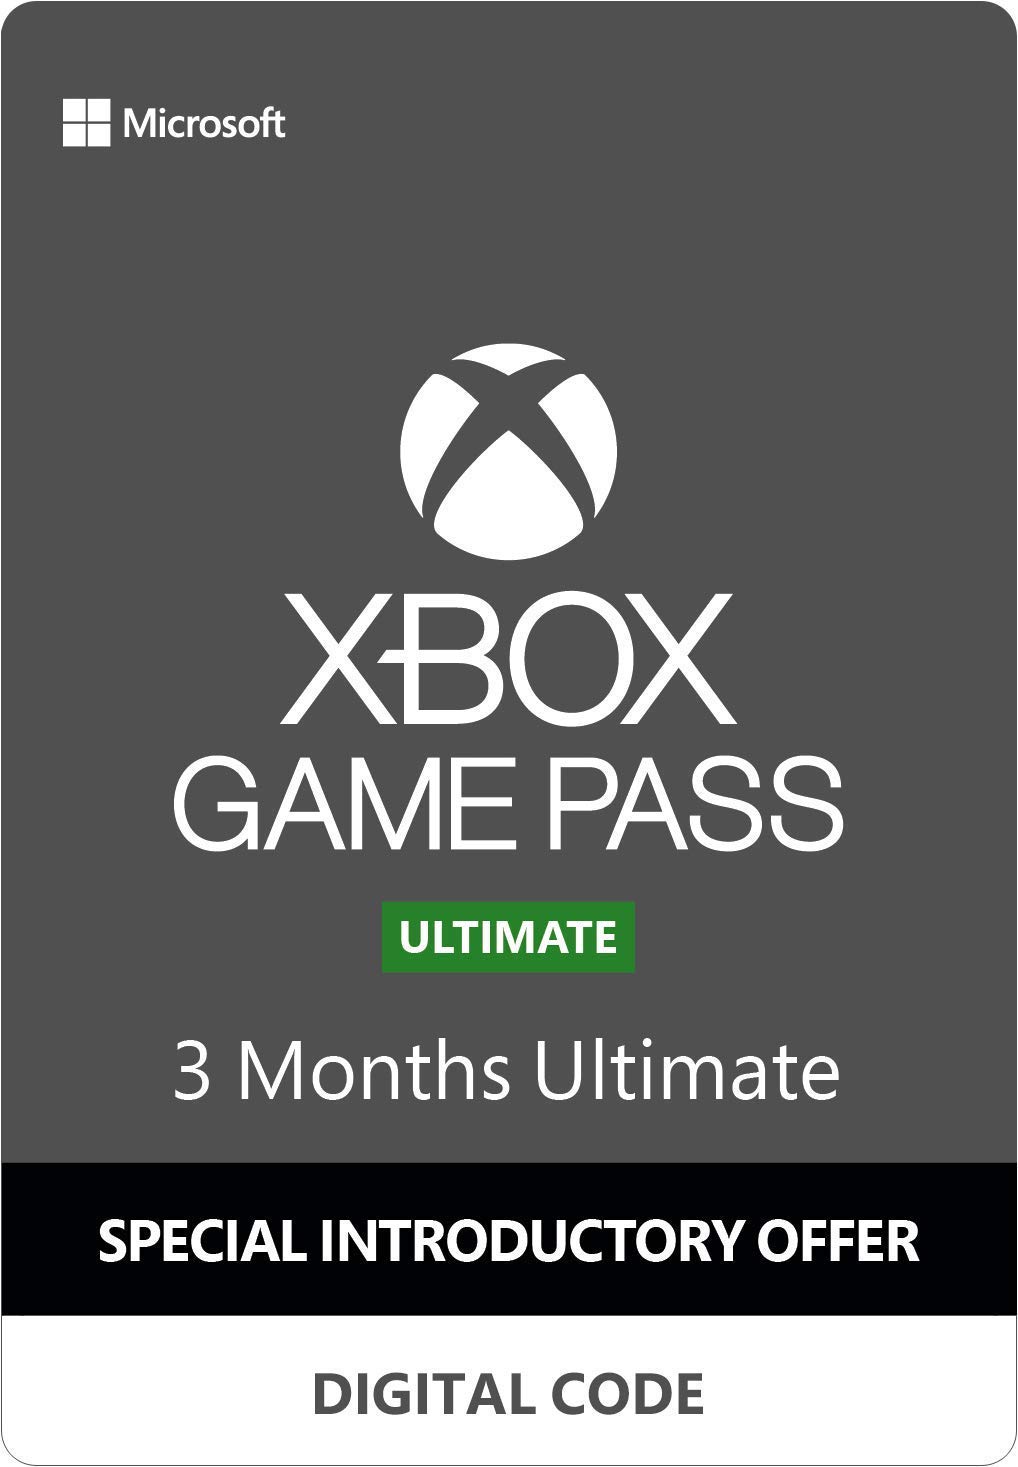 xbox game pass ultimate 3 months $1